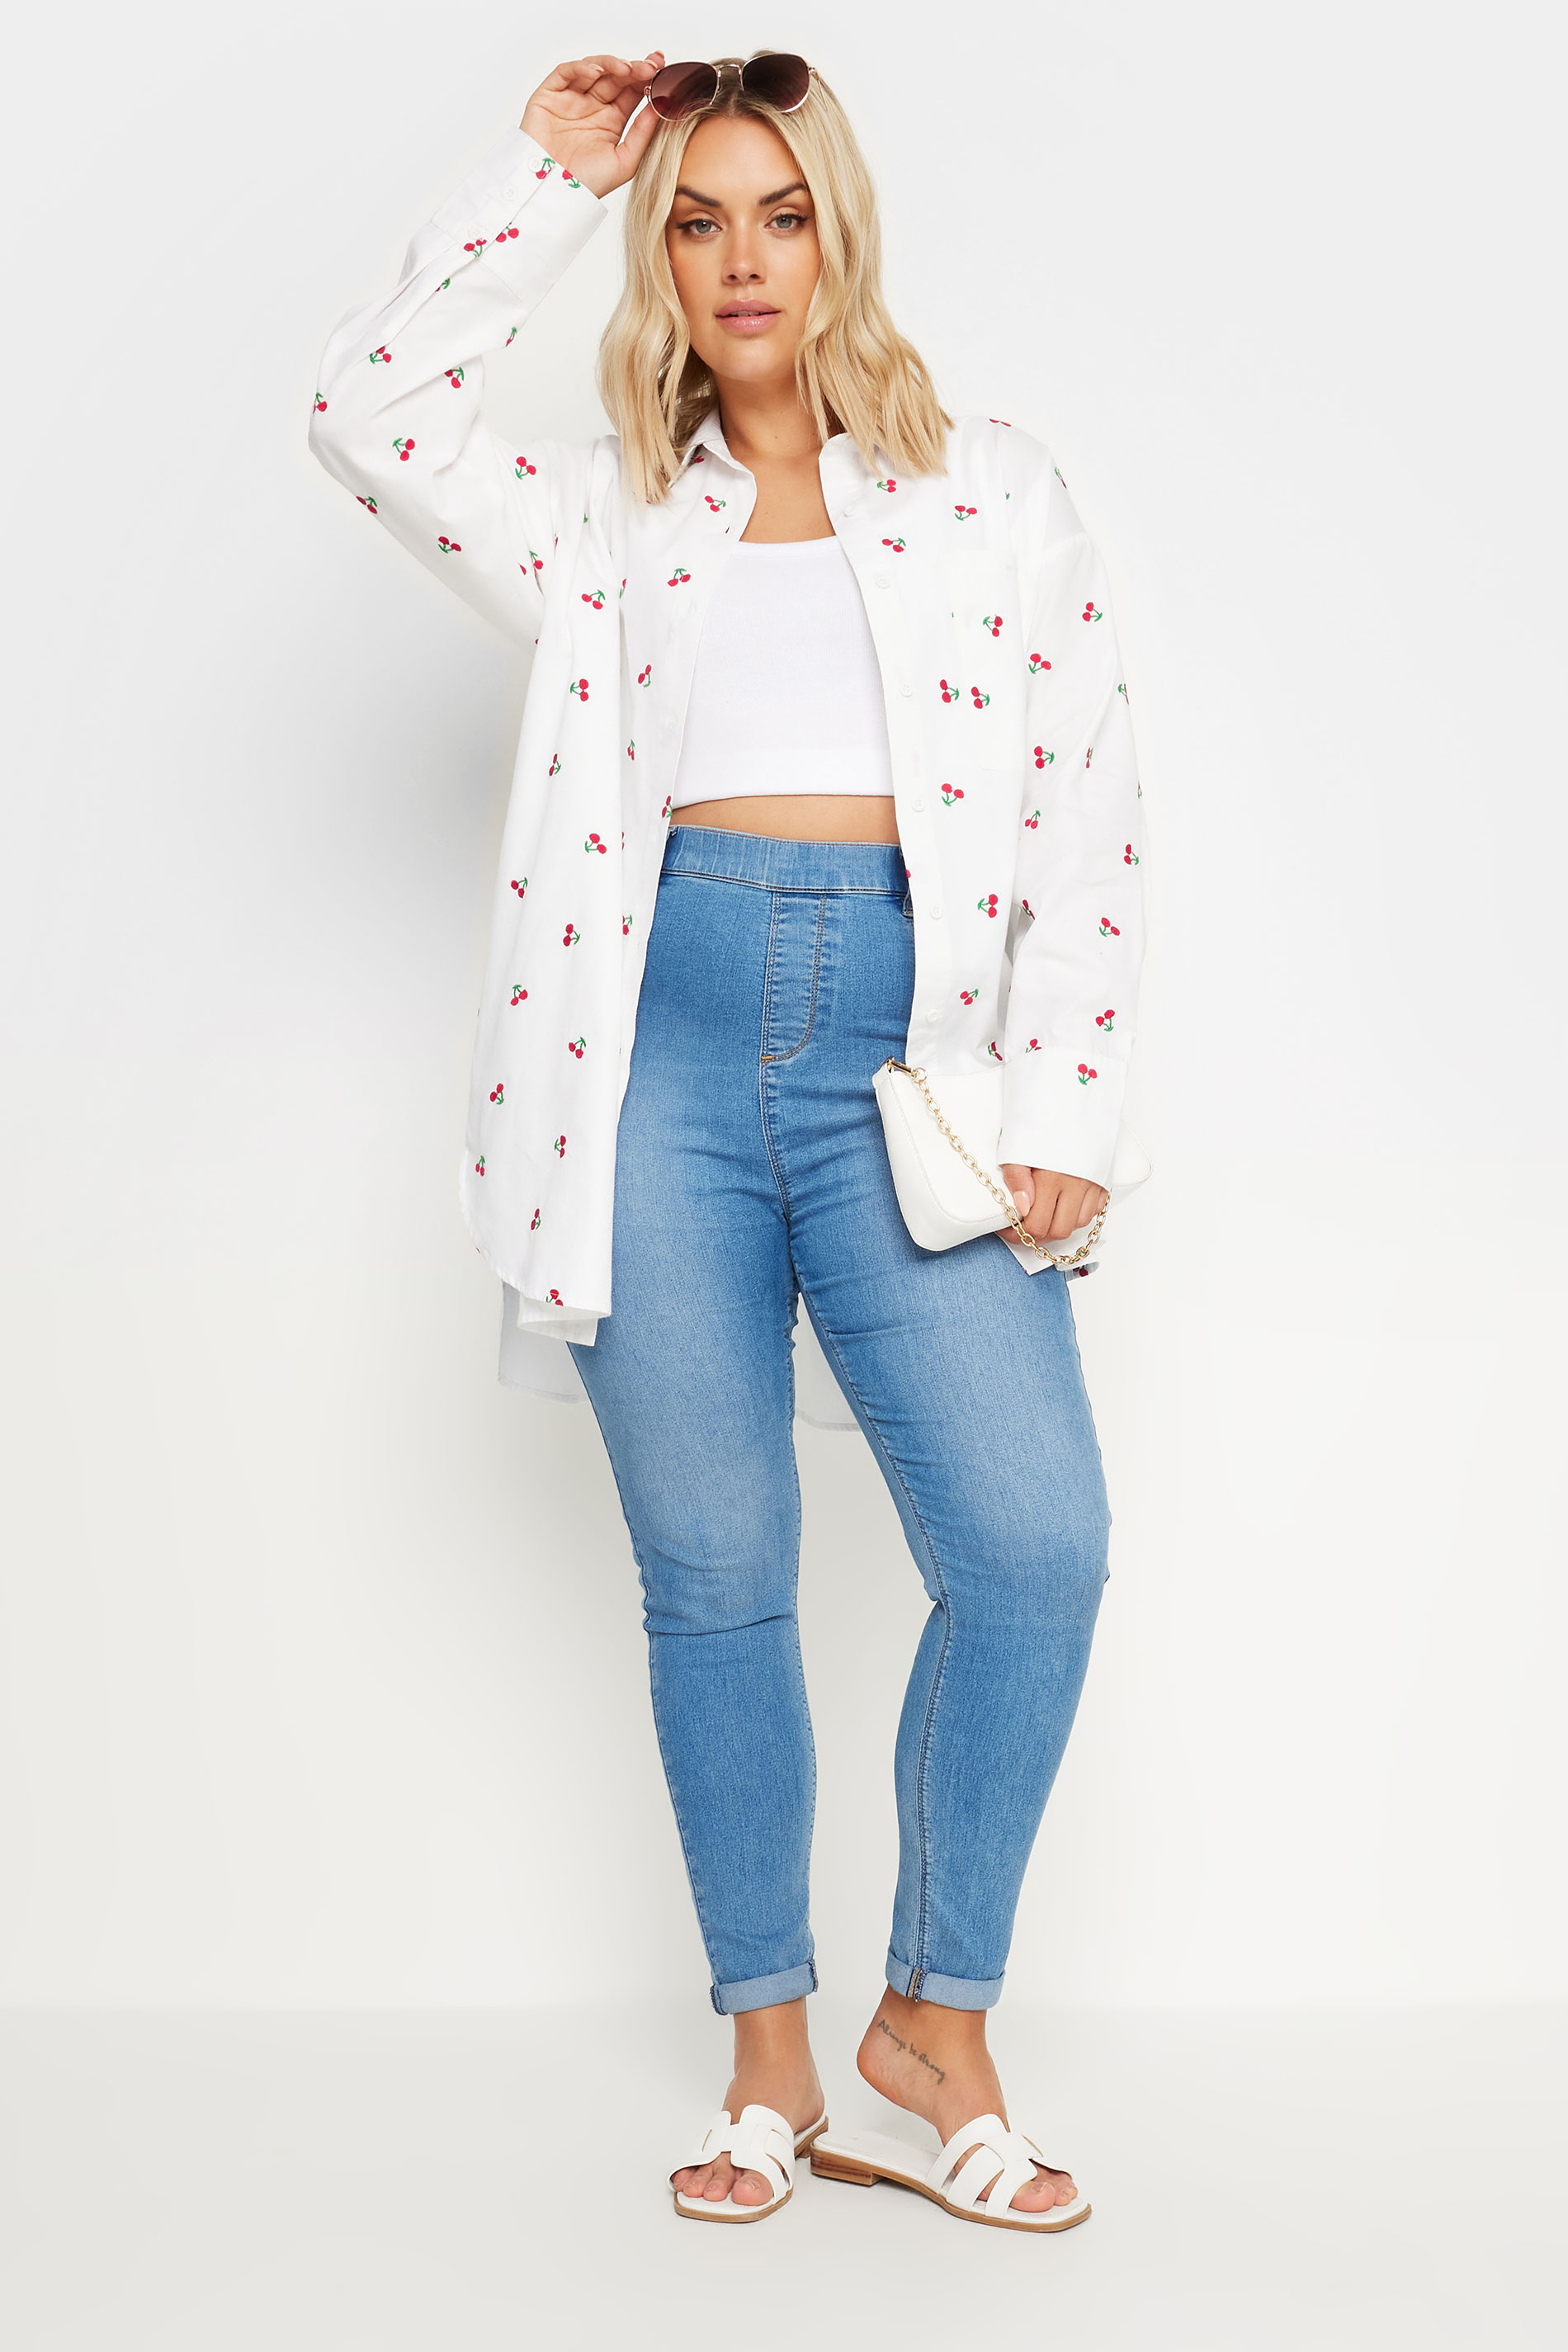 LIMITED COLLECTION Plus Size White Embroidered Cherry Shirt | Yours Clothing 2